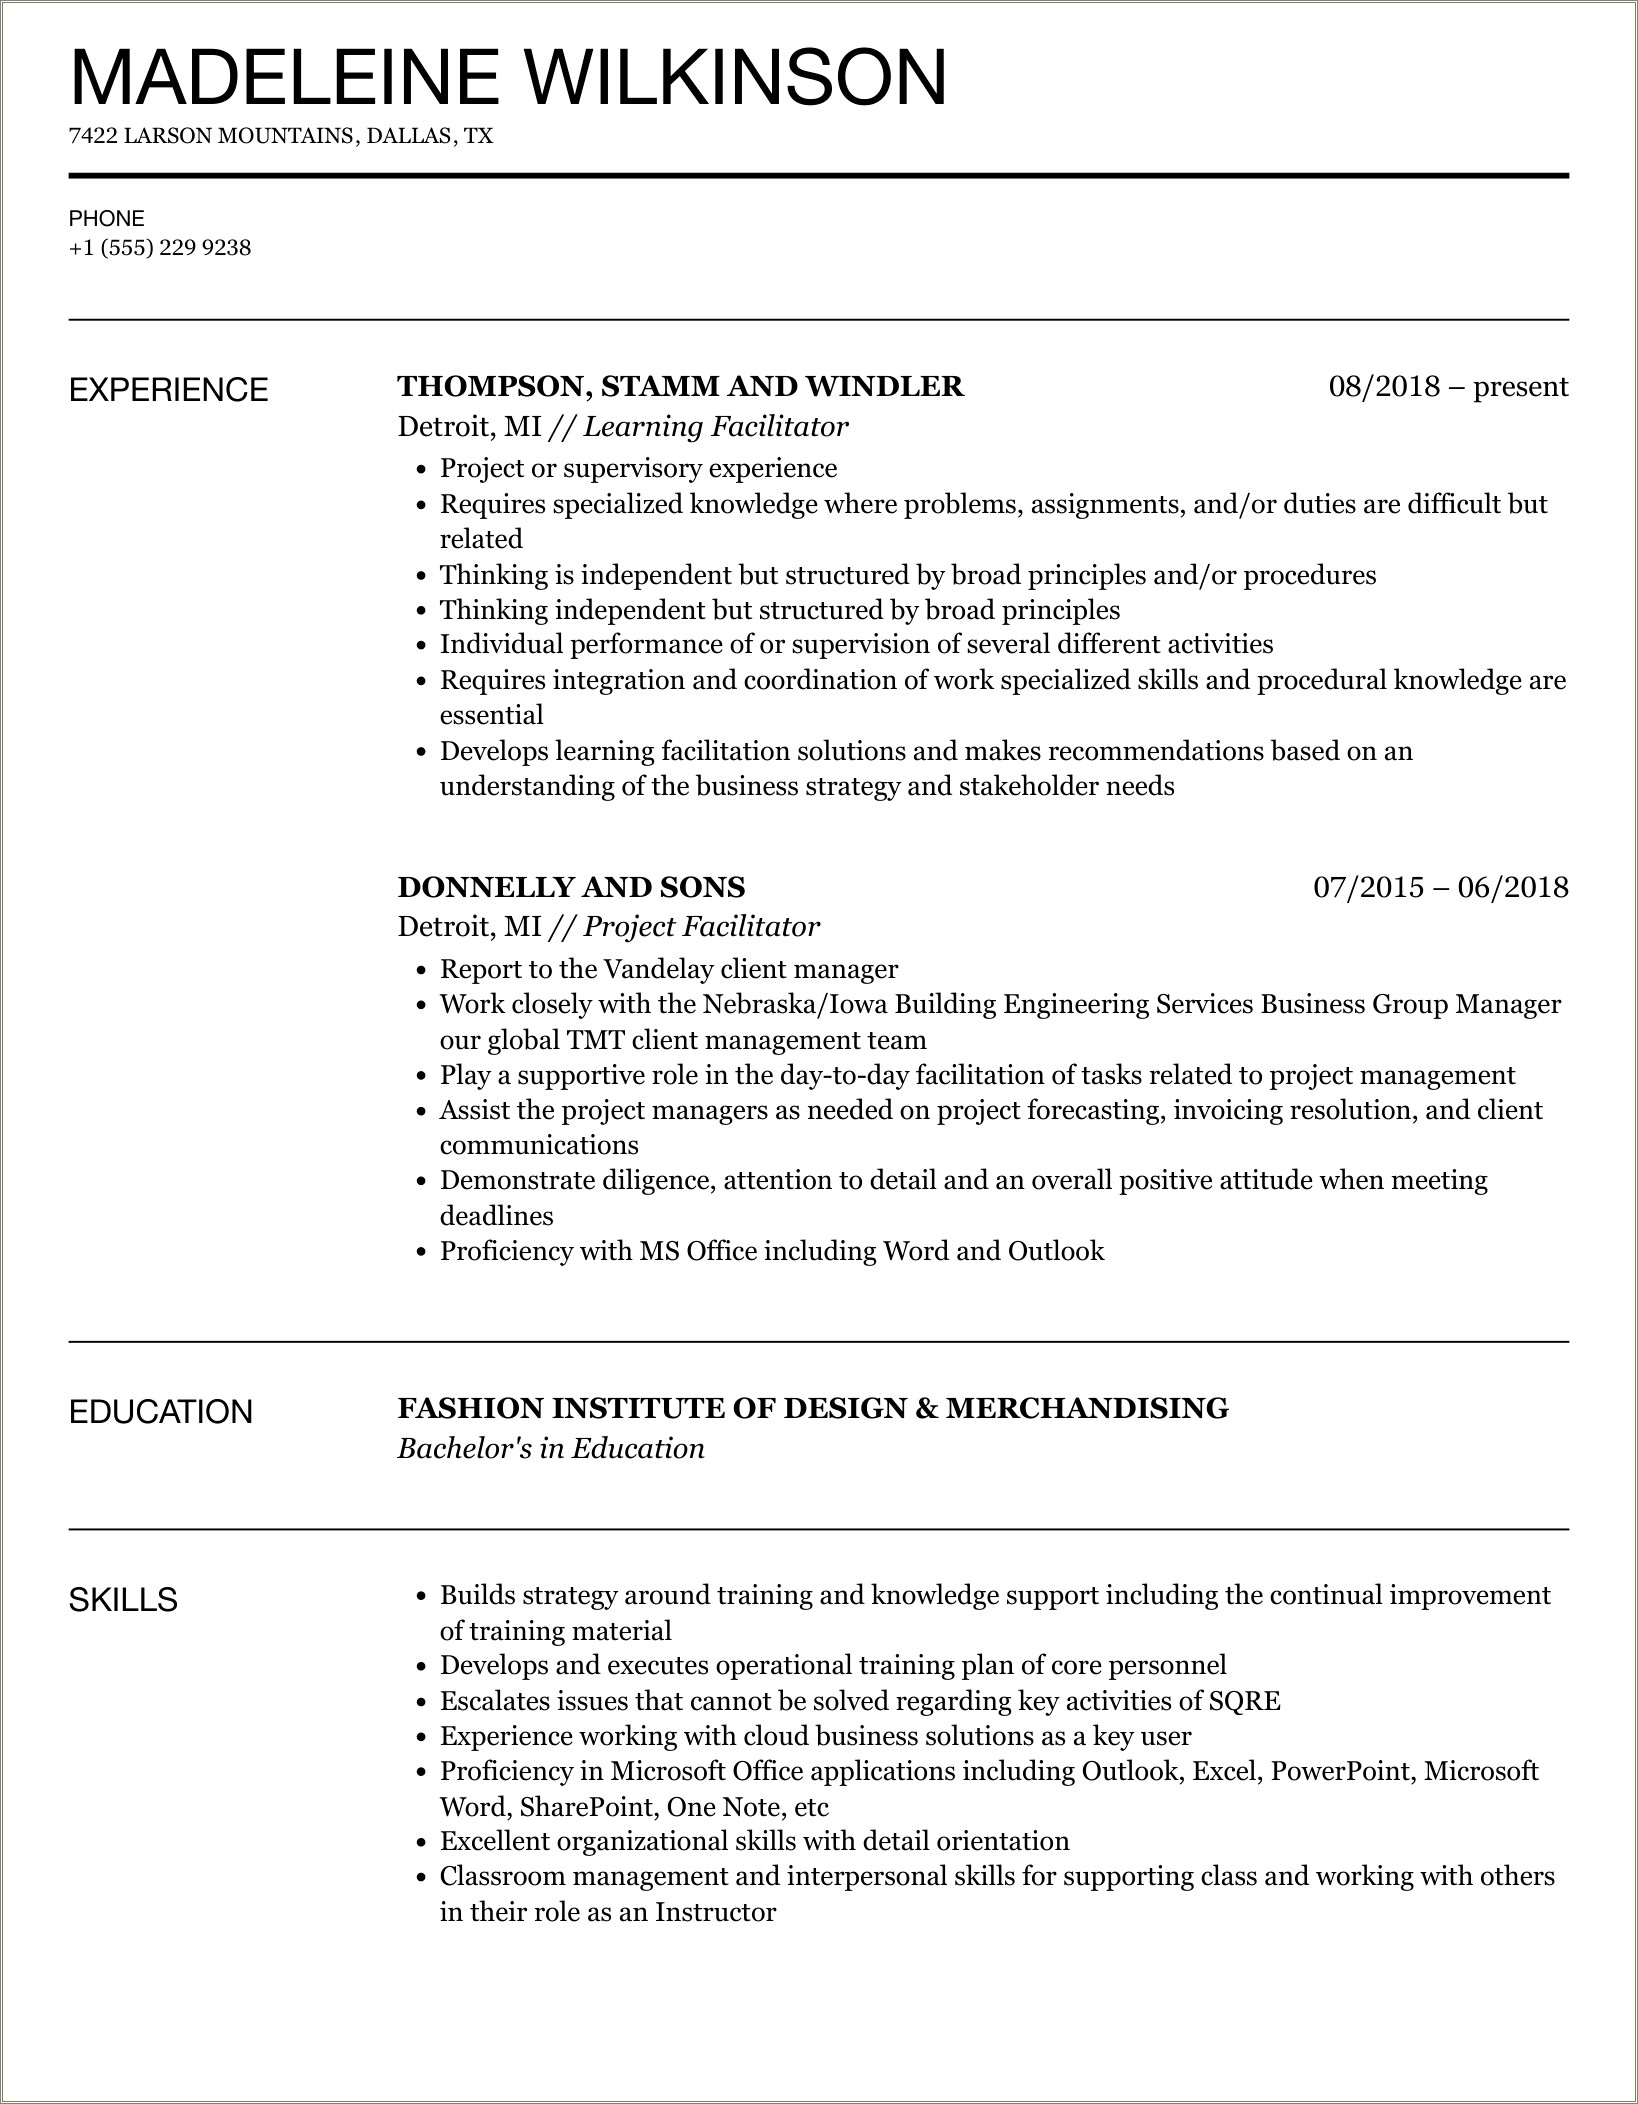 Chs Supervisor Youth Care Worker Template Resume